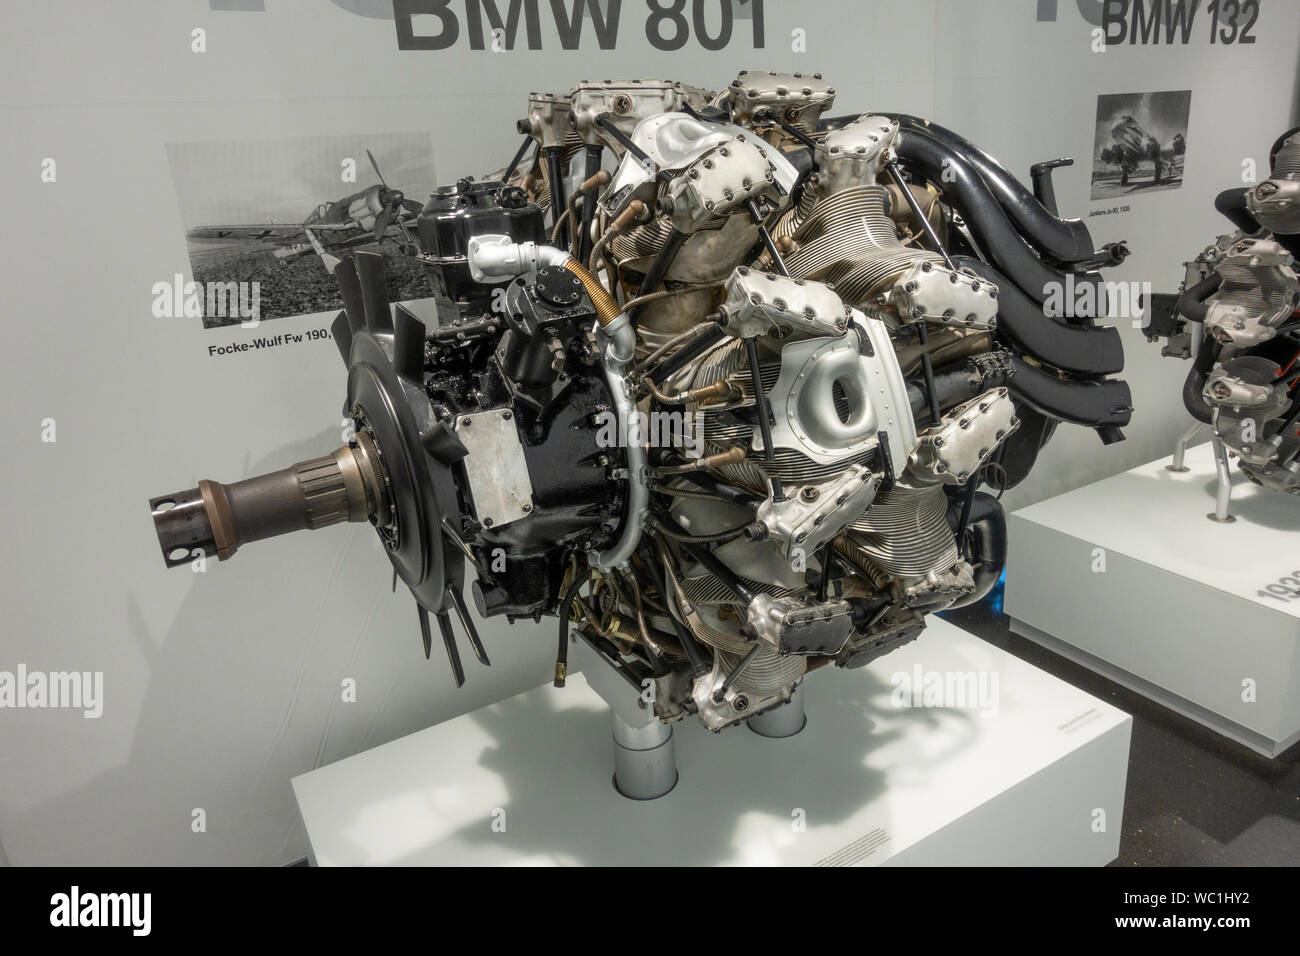 A BMW 801 air-cooled 14-cylinder-radial aircraft engine, as used by the German Luftwaffe on a Focke-Wulf Fw 190, BMW Museum, Munich, Bavaria, Germany. Stock Photo